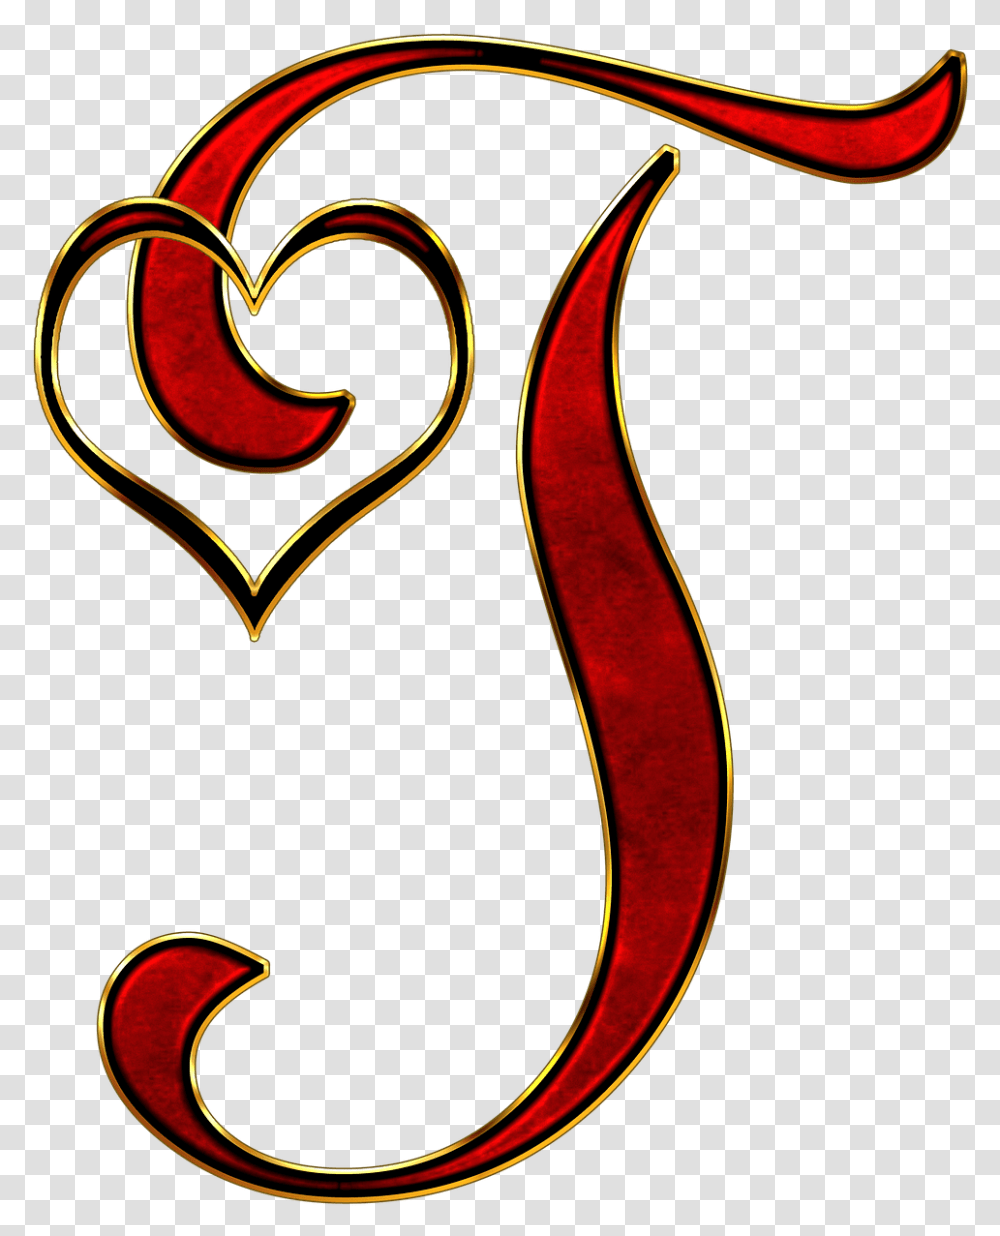 T Letter Free Image Capital Letter T Calligraphy, Label Transparent Png